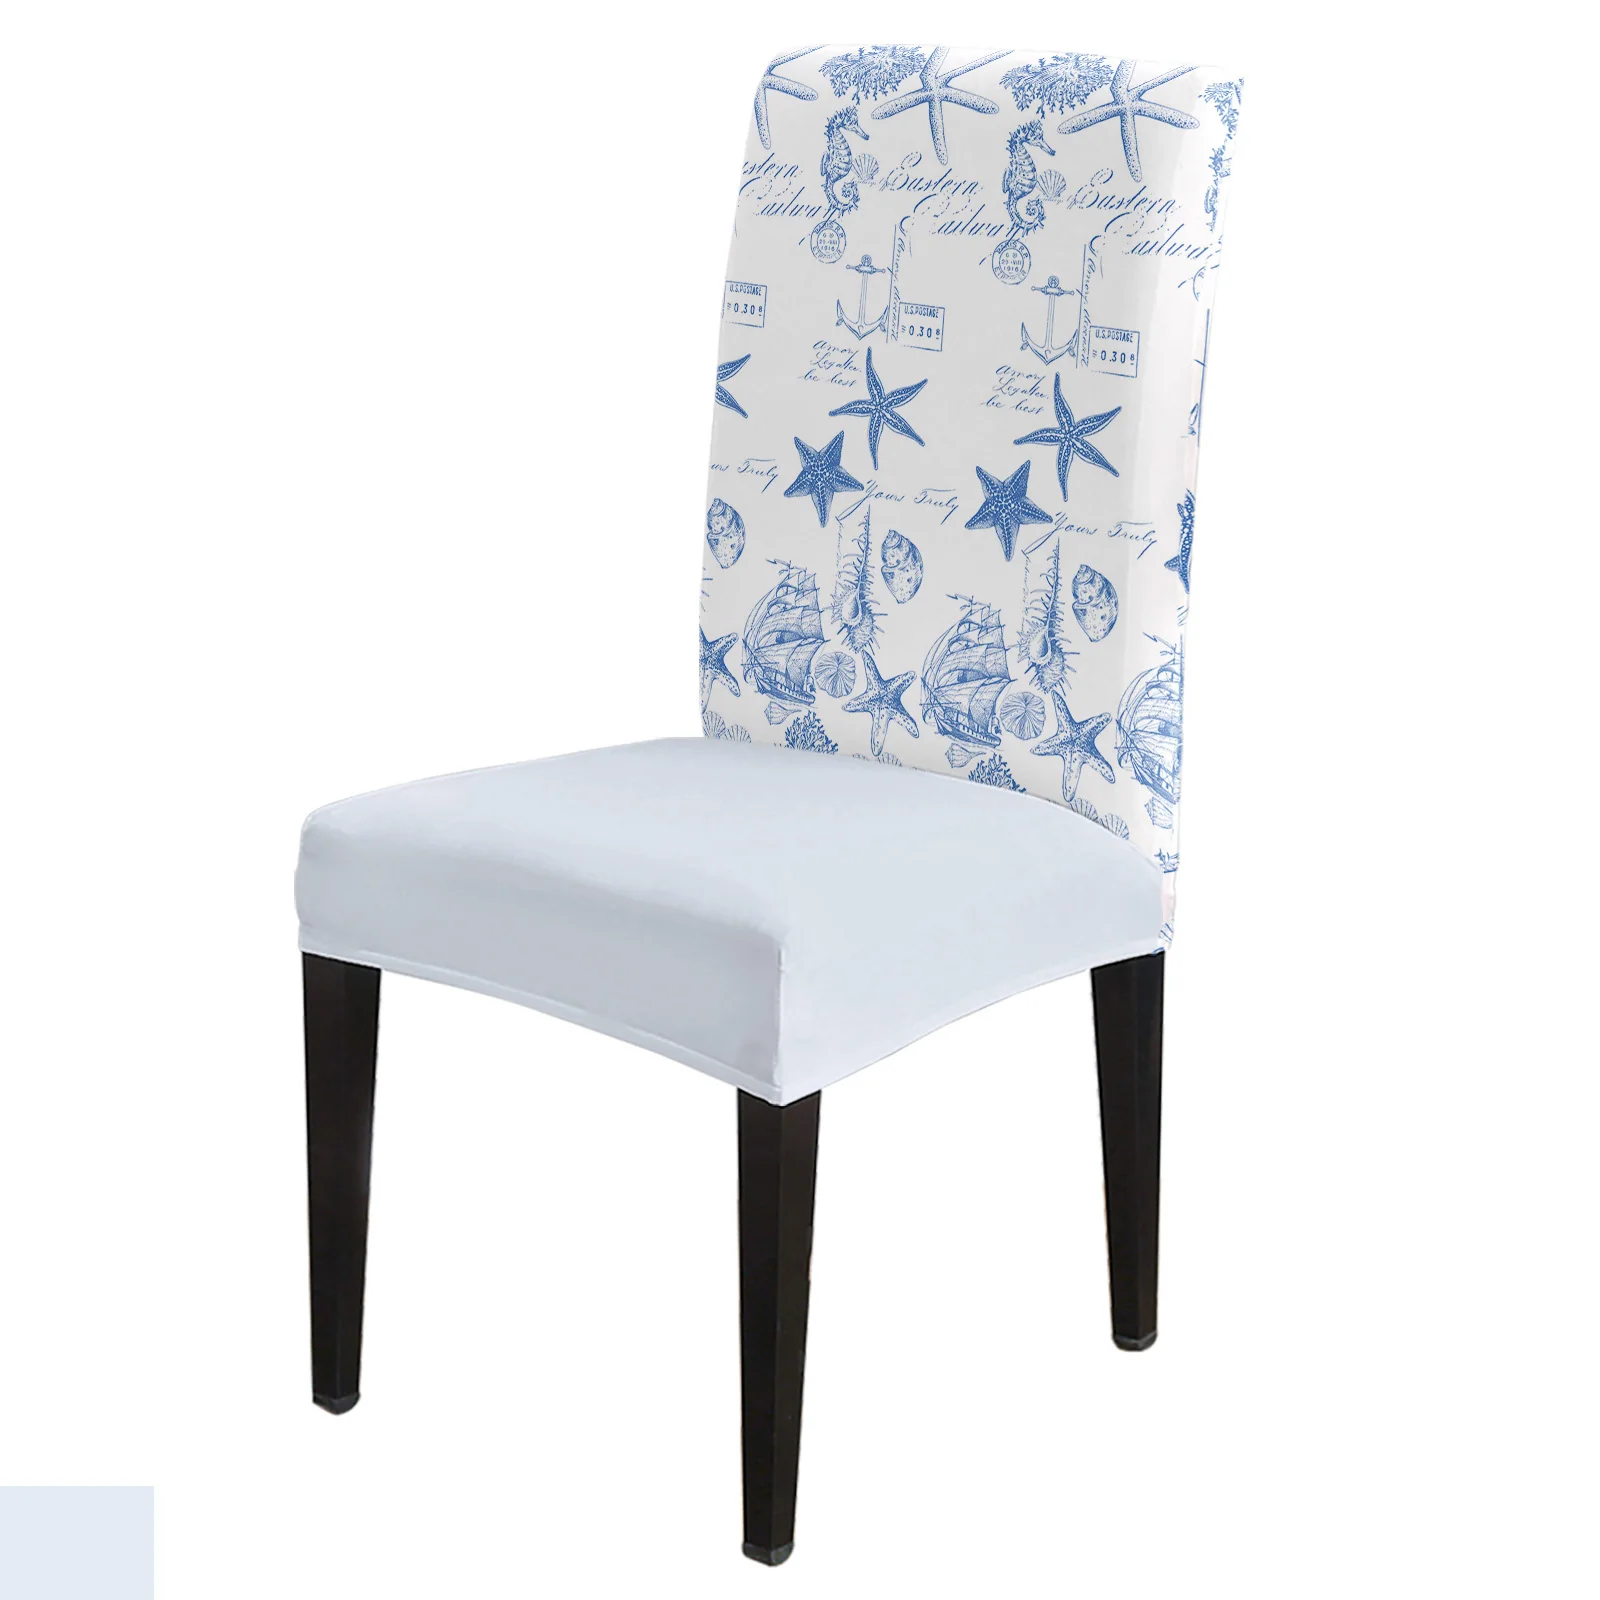 

Blue Ocean Starfish Conch Seahorse Anchor Chair Cover Stretch Elastic Dining Room Chair Slipcover Spandex Case for Office Chair